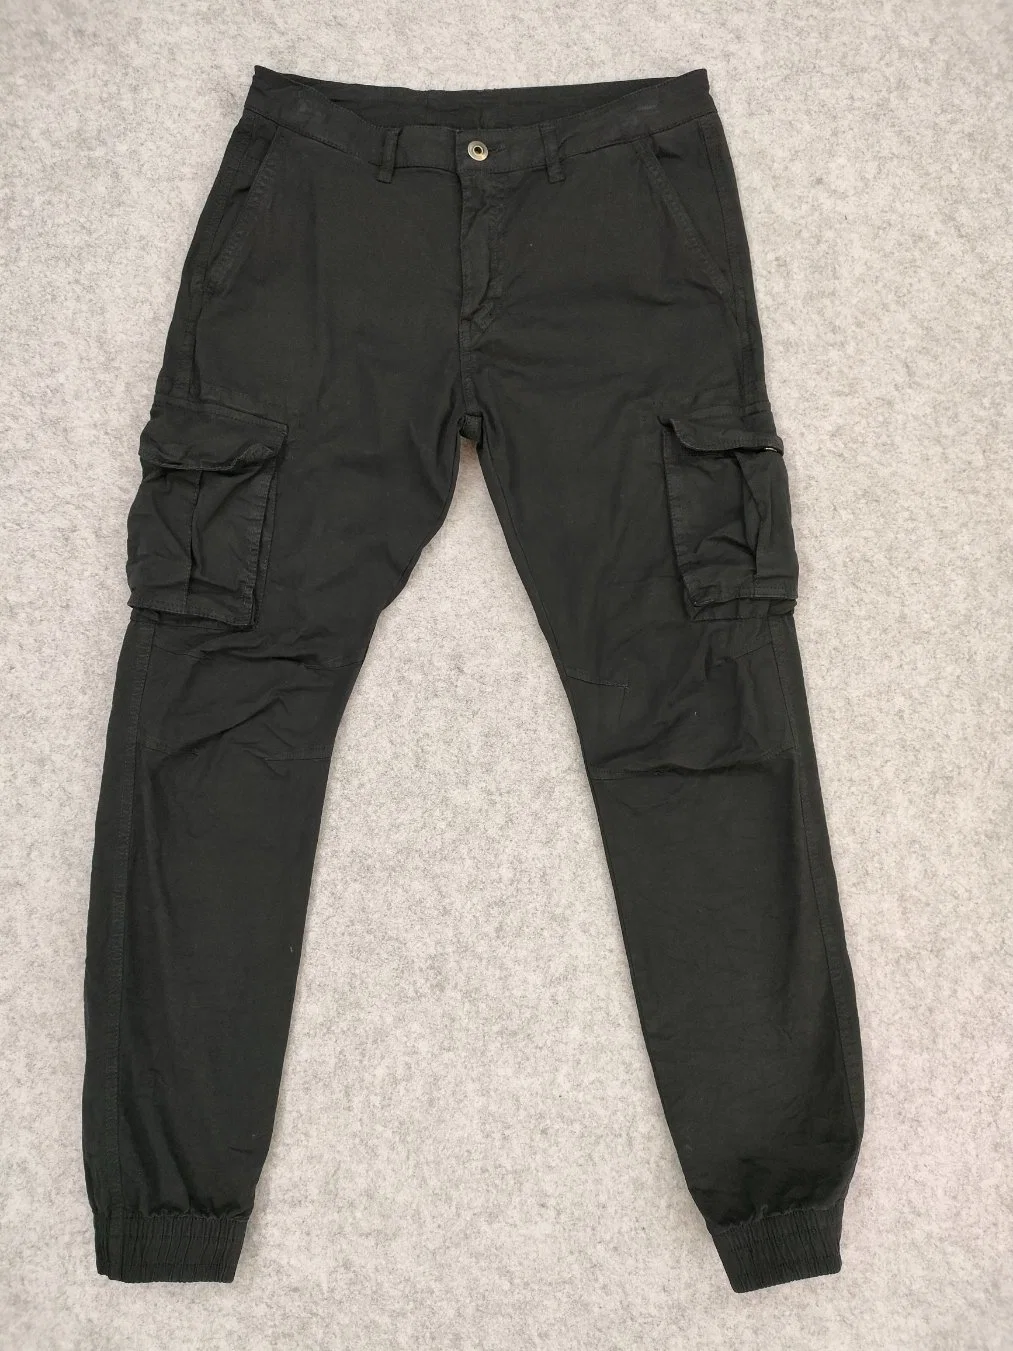 Skinny Cargo Pants Slim Fit Pants/Jeans with Leg Opening Zipper